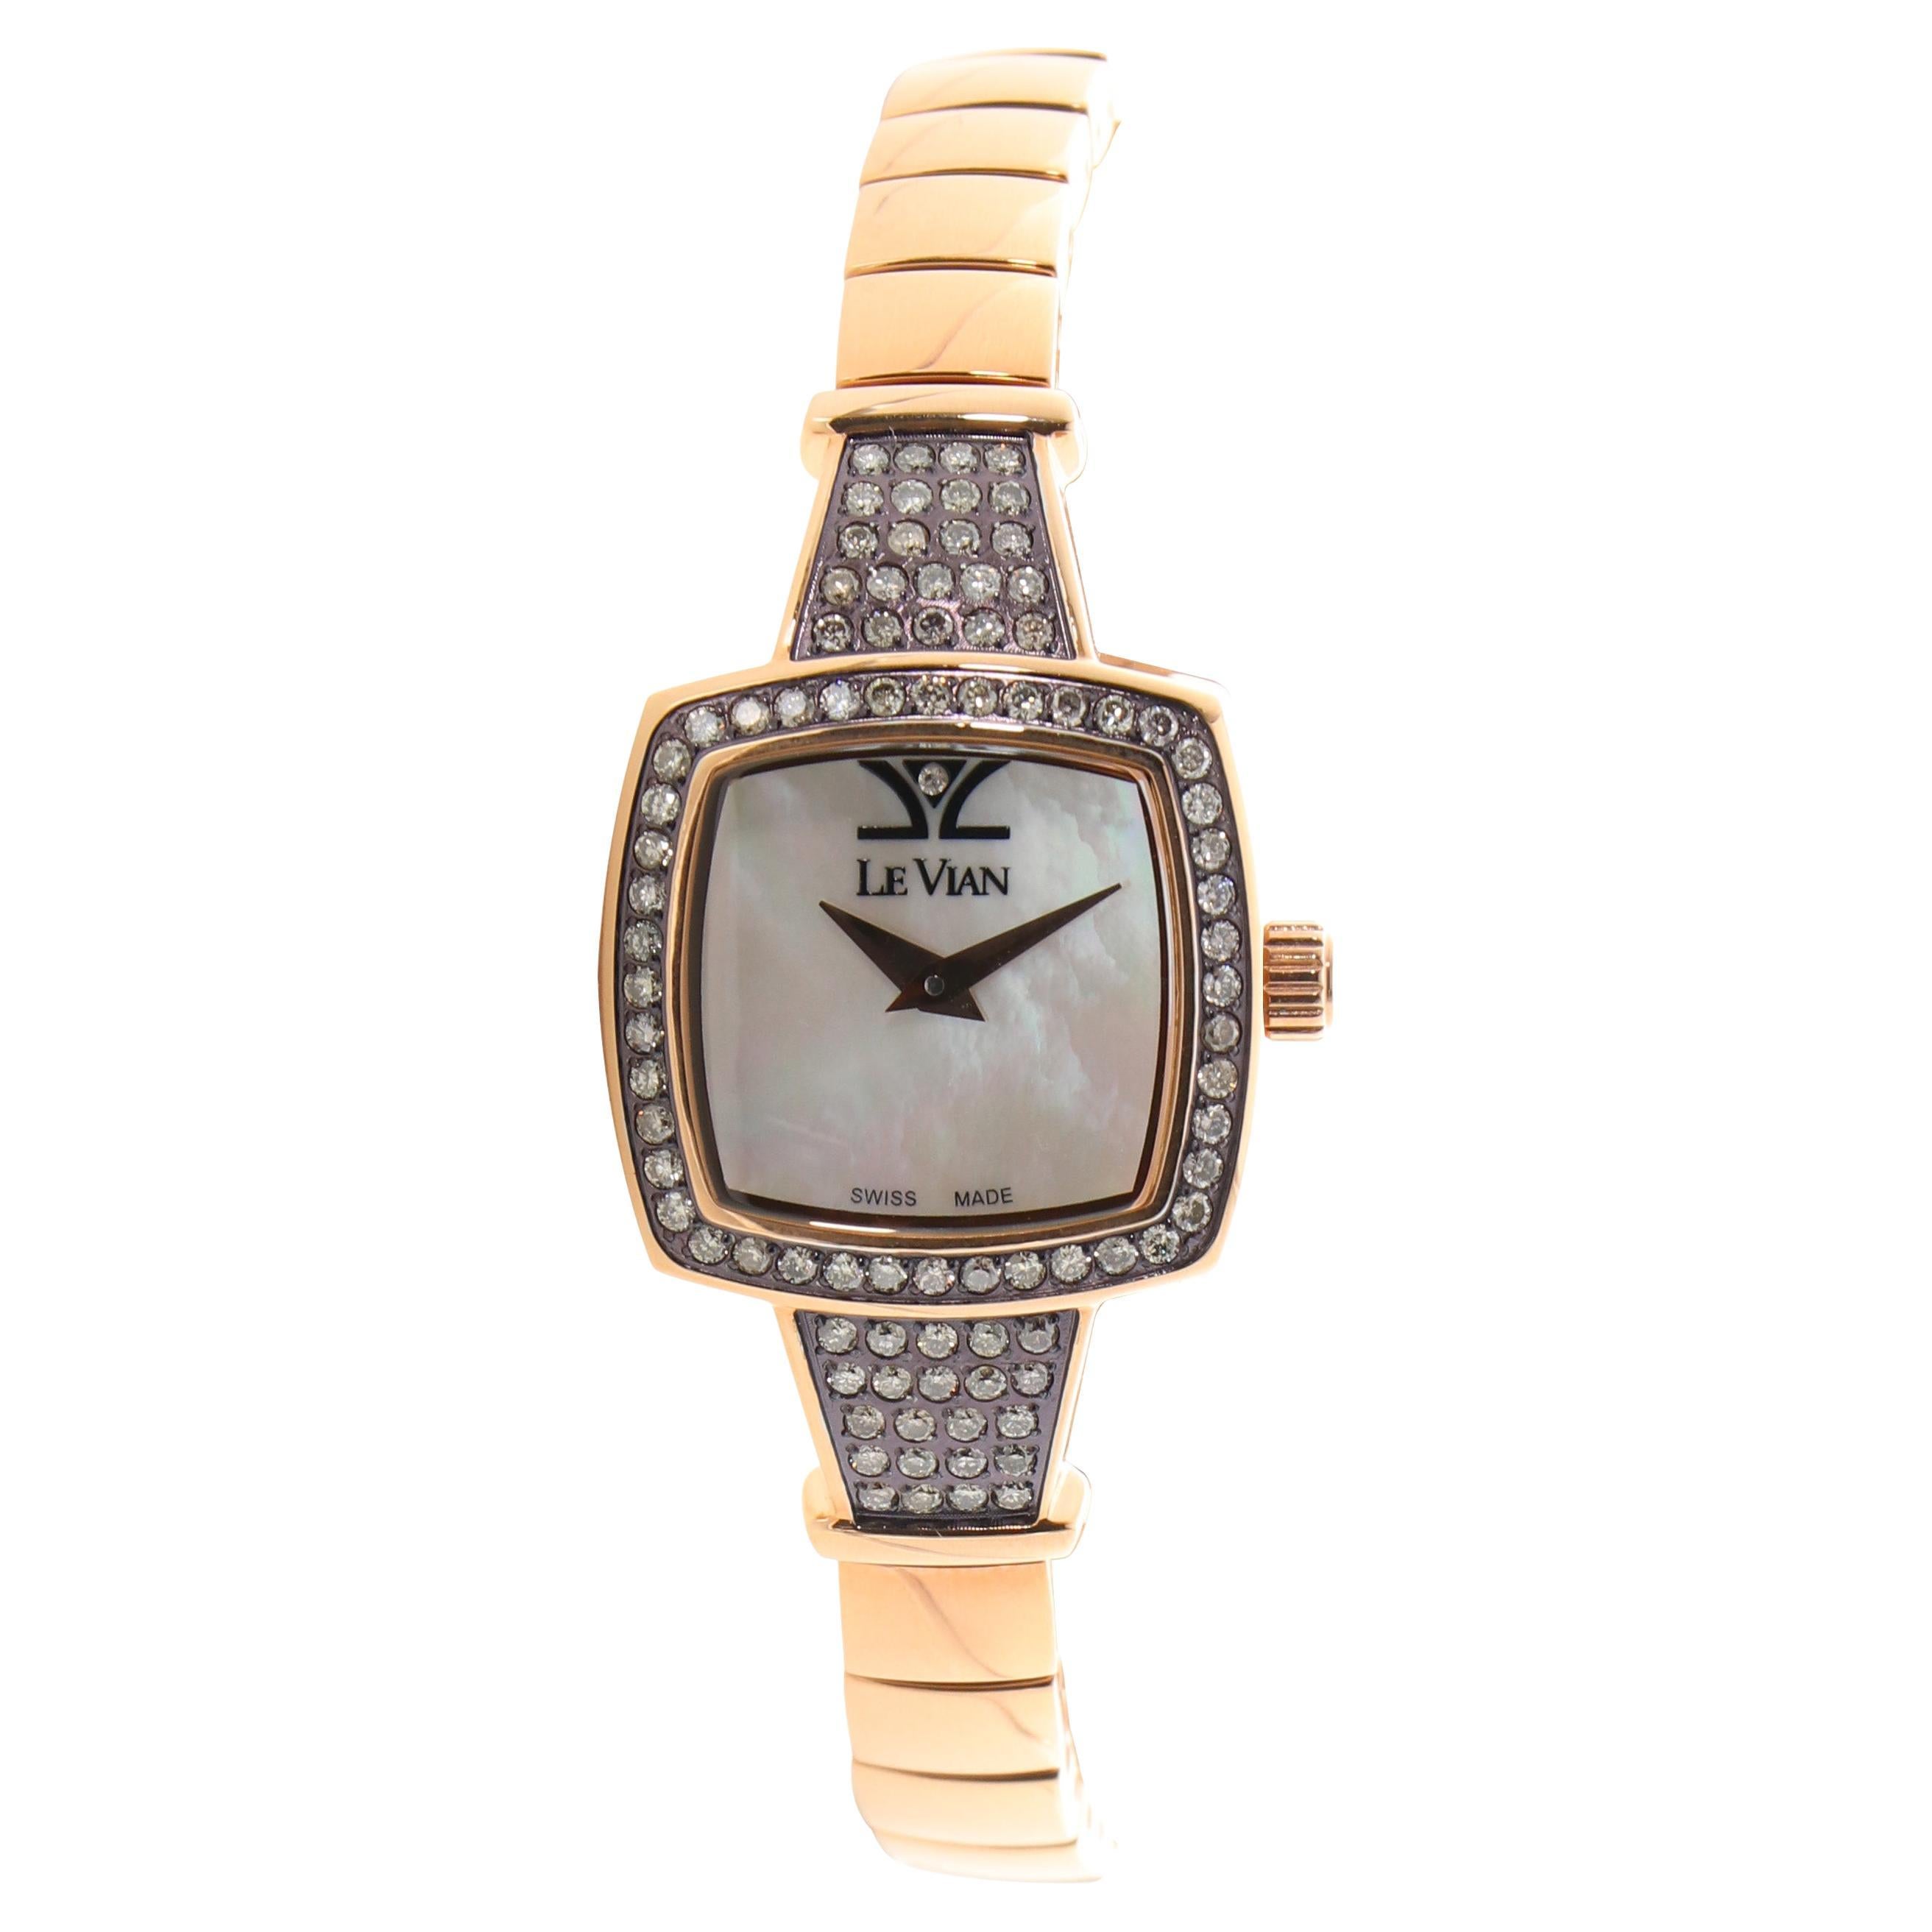 Le Vian Square Ladies' Wristwatch Chocolate and Vanilla For Sale